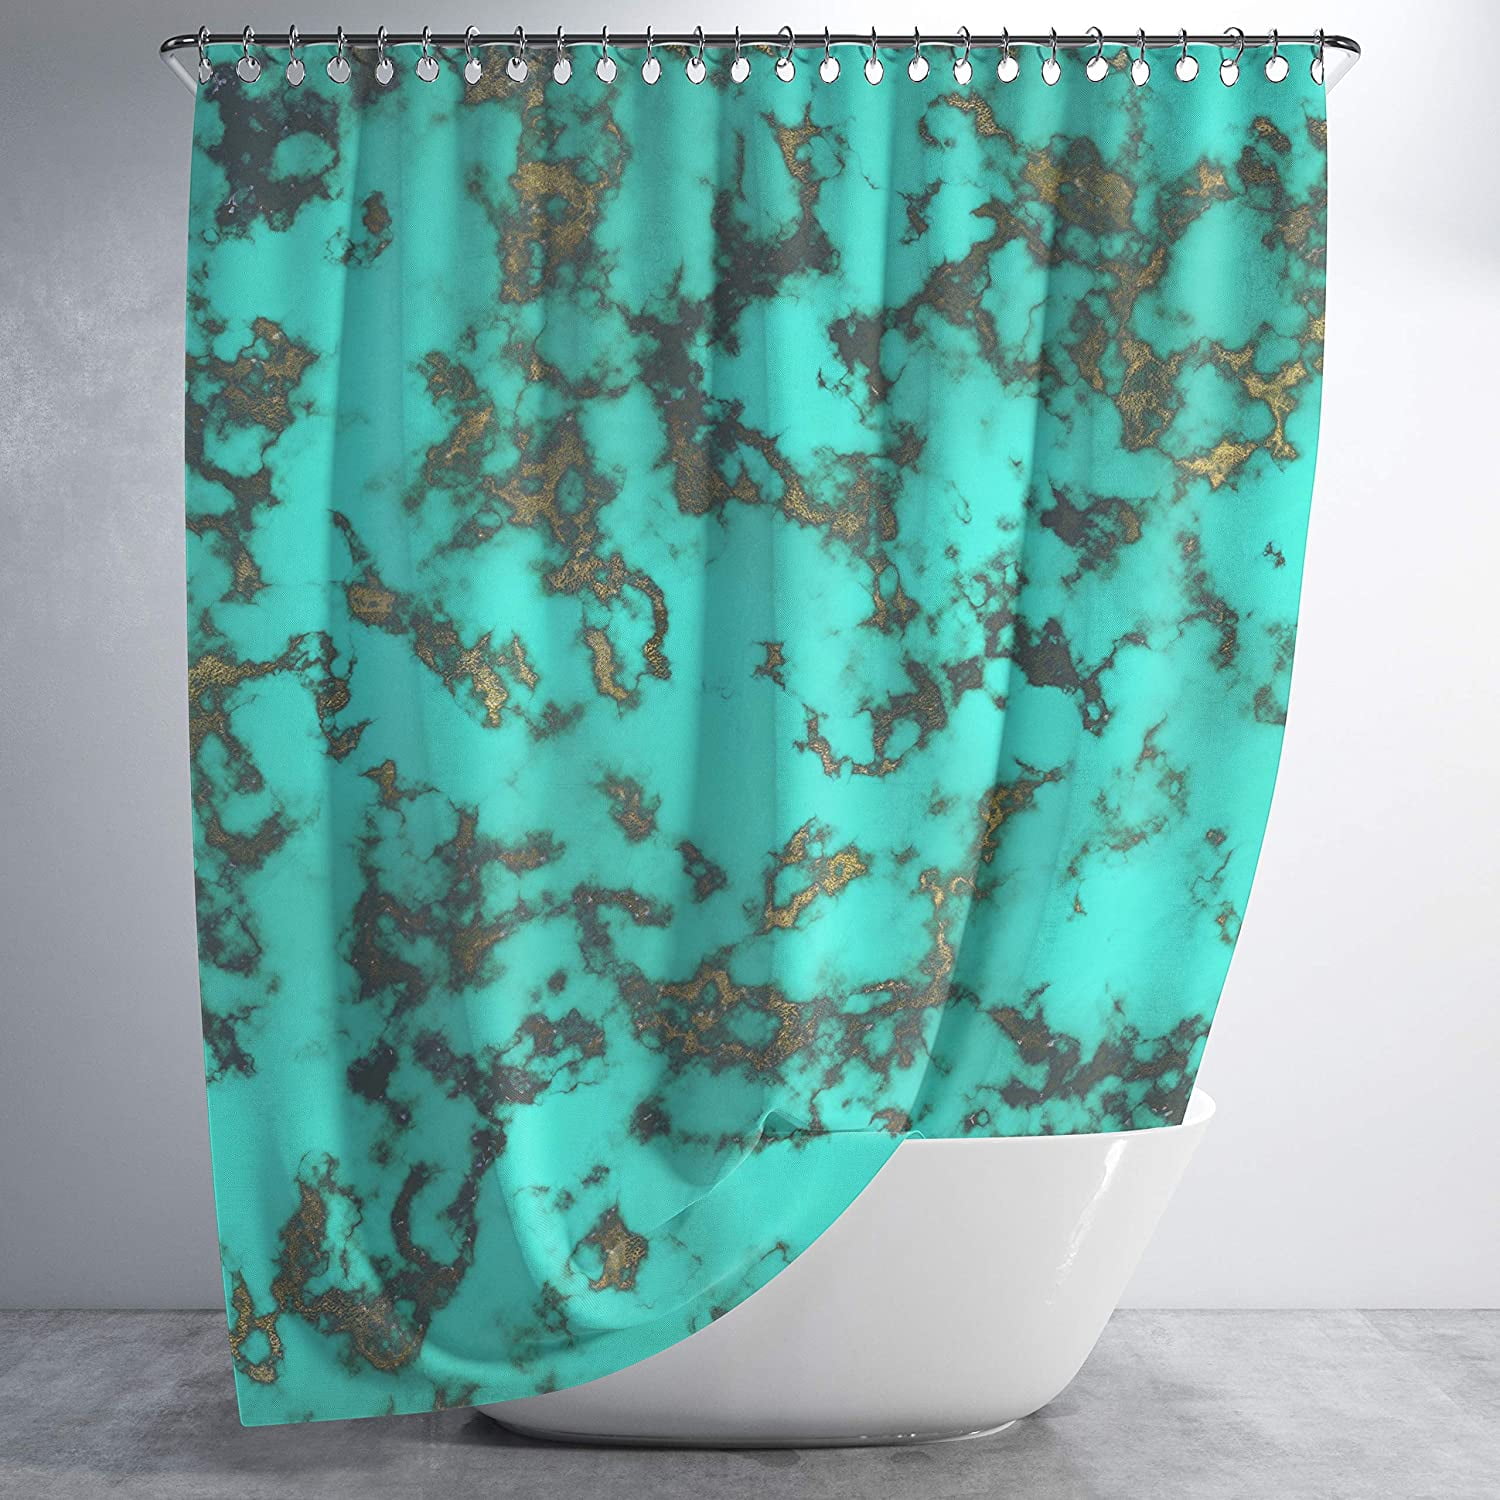 Turquoise Stone Shower Curtain Western, Western Turquoise Shower Curtain